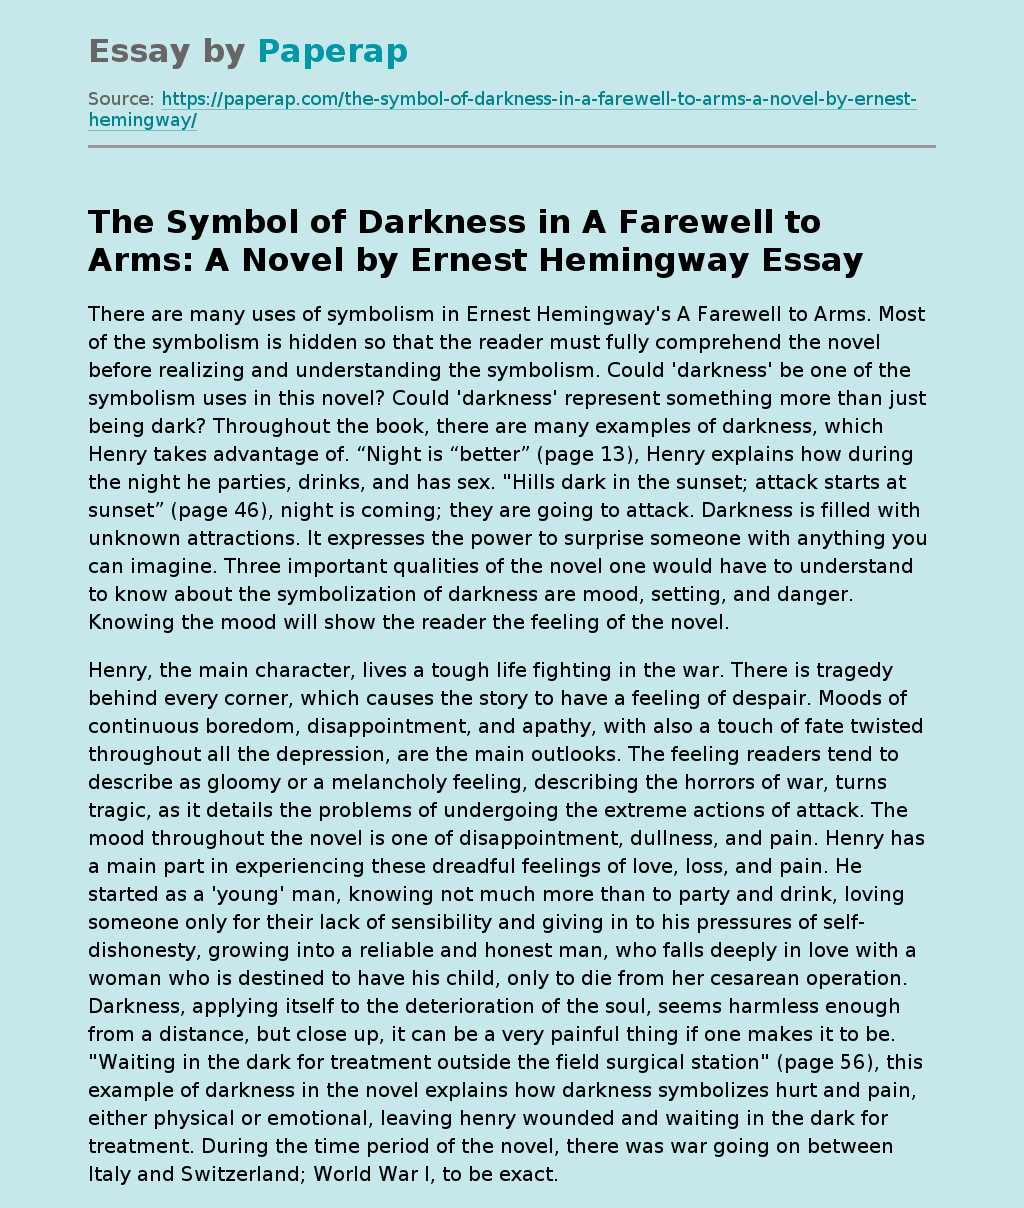 The Symbol of Darkness in A Farewell to Arms: A Novel by Ernest Hemingway